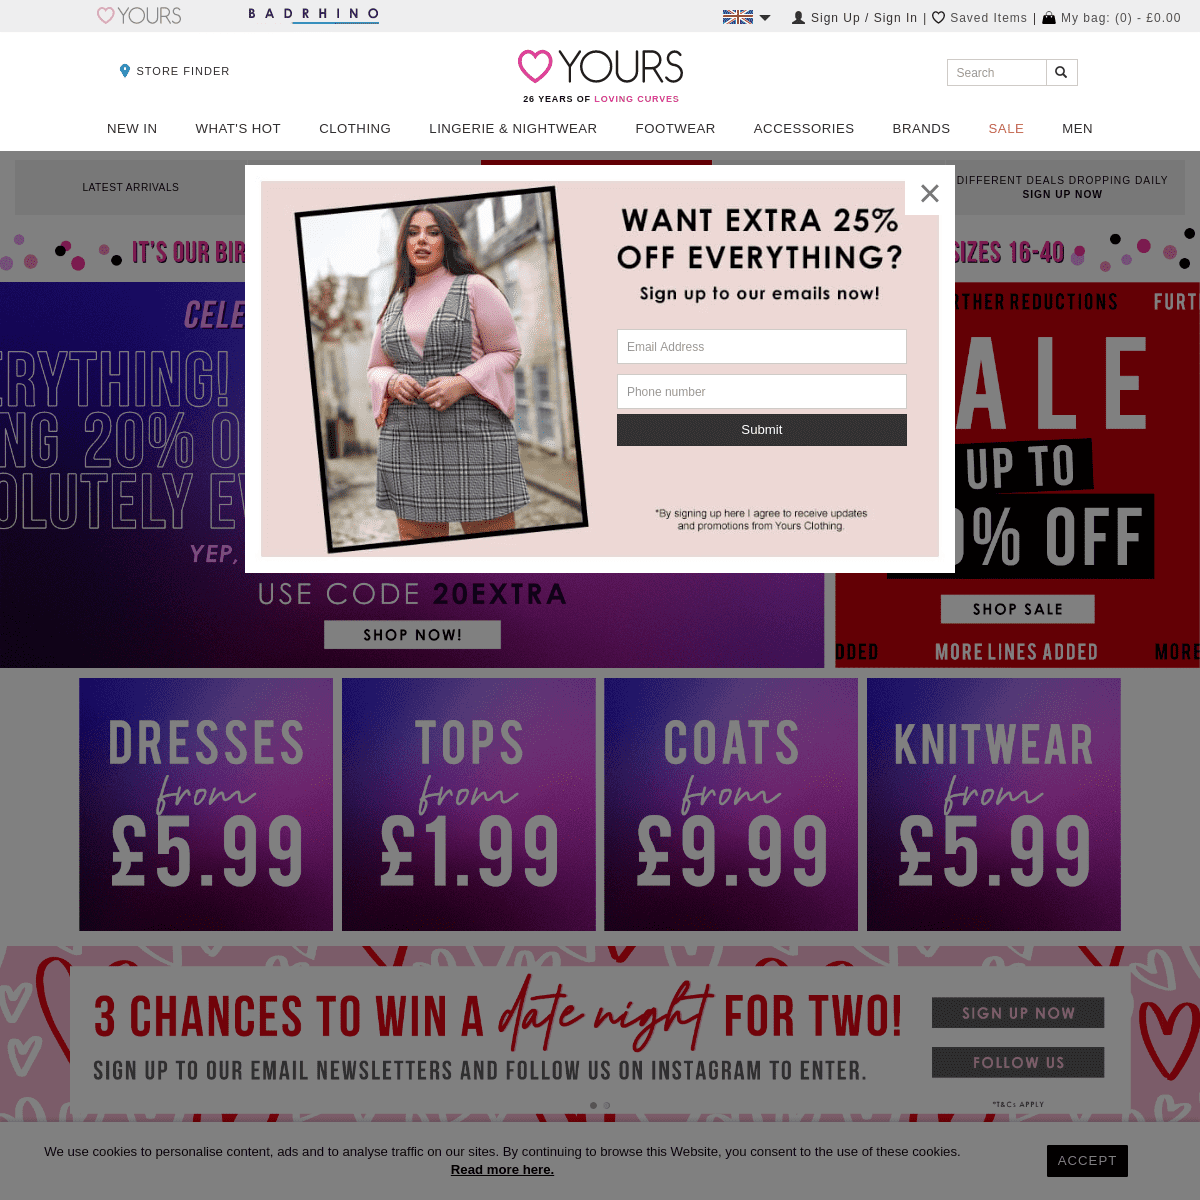 A complete backup of yoursclothing.co.uk